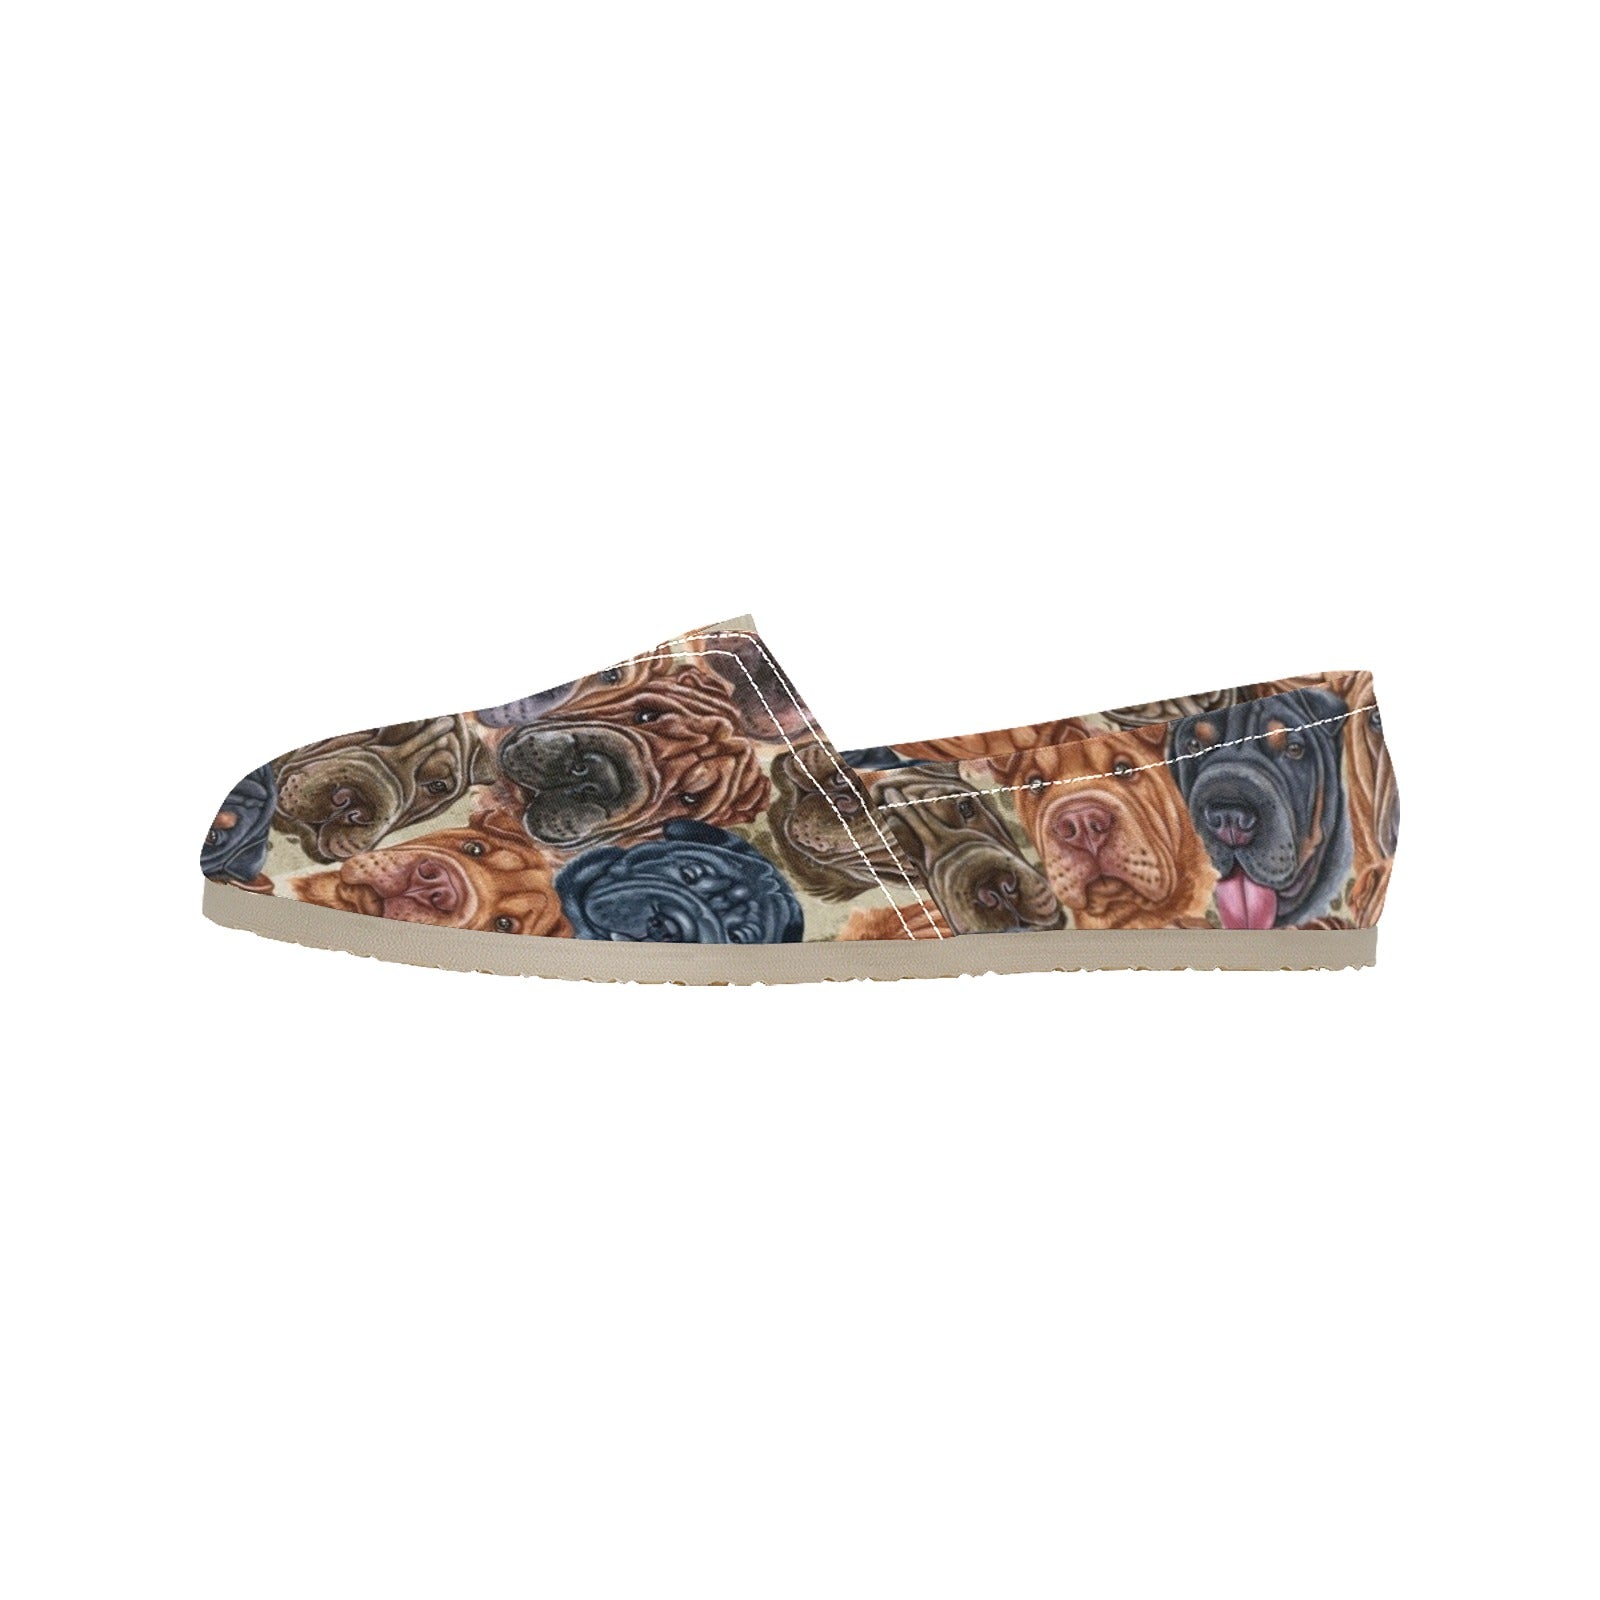 Shar Pei - Casual Canvas Slip-on Shoes